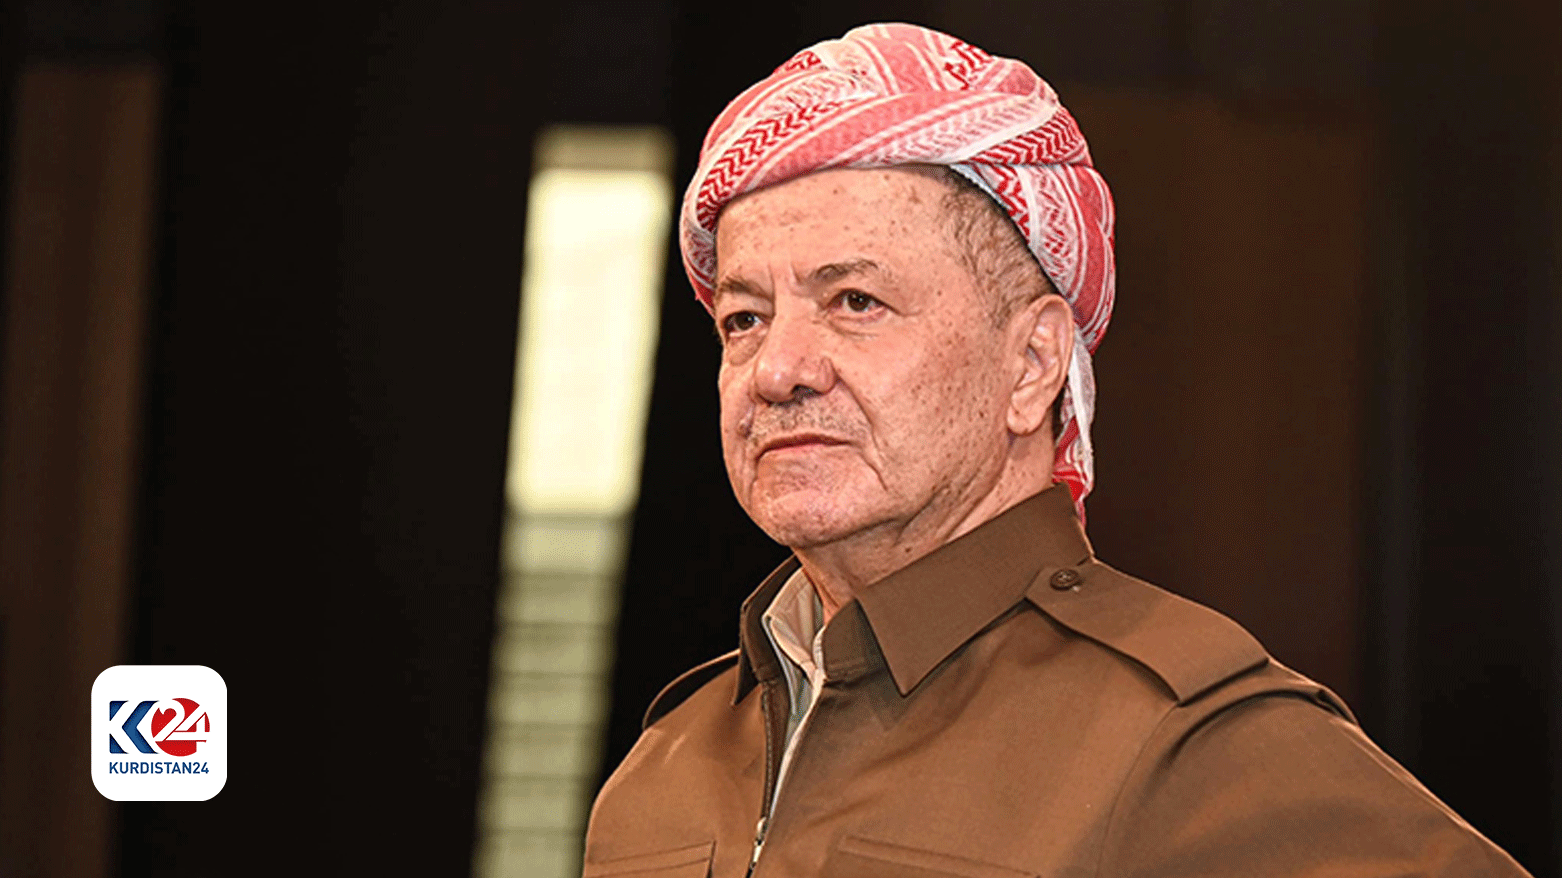 On the 54th anniversary of the March 11 agreement, KDP President Masoud Barzani delivered a poignant message. (Photo: Kurdistan 24)